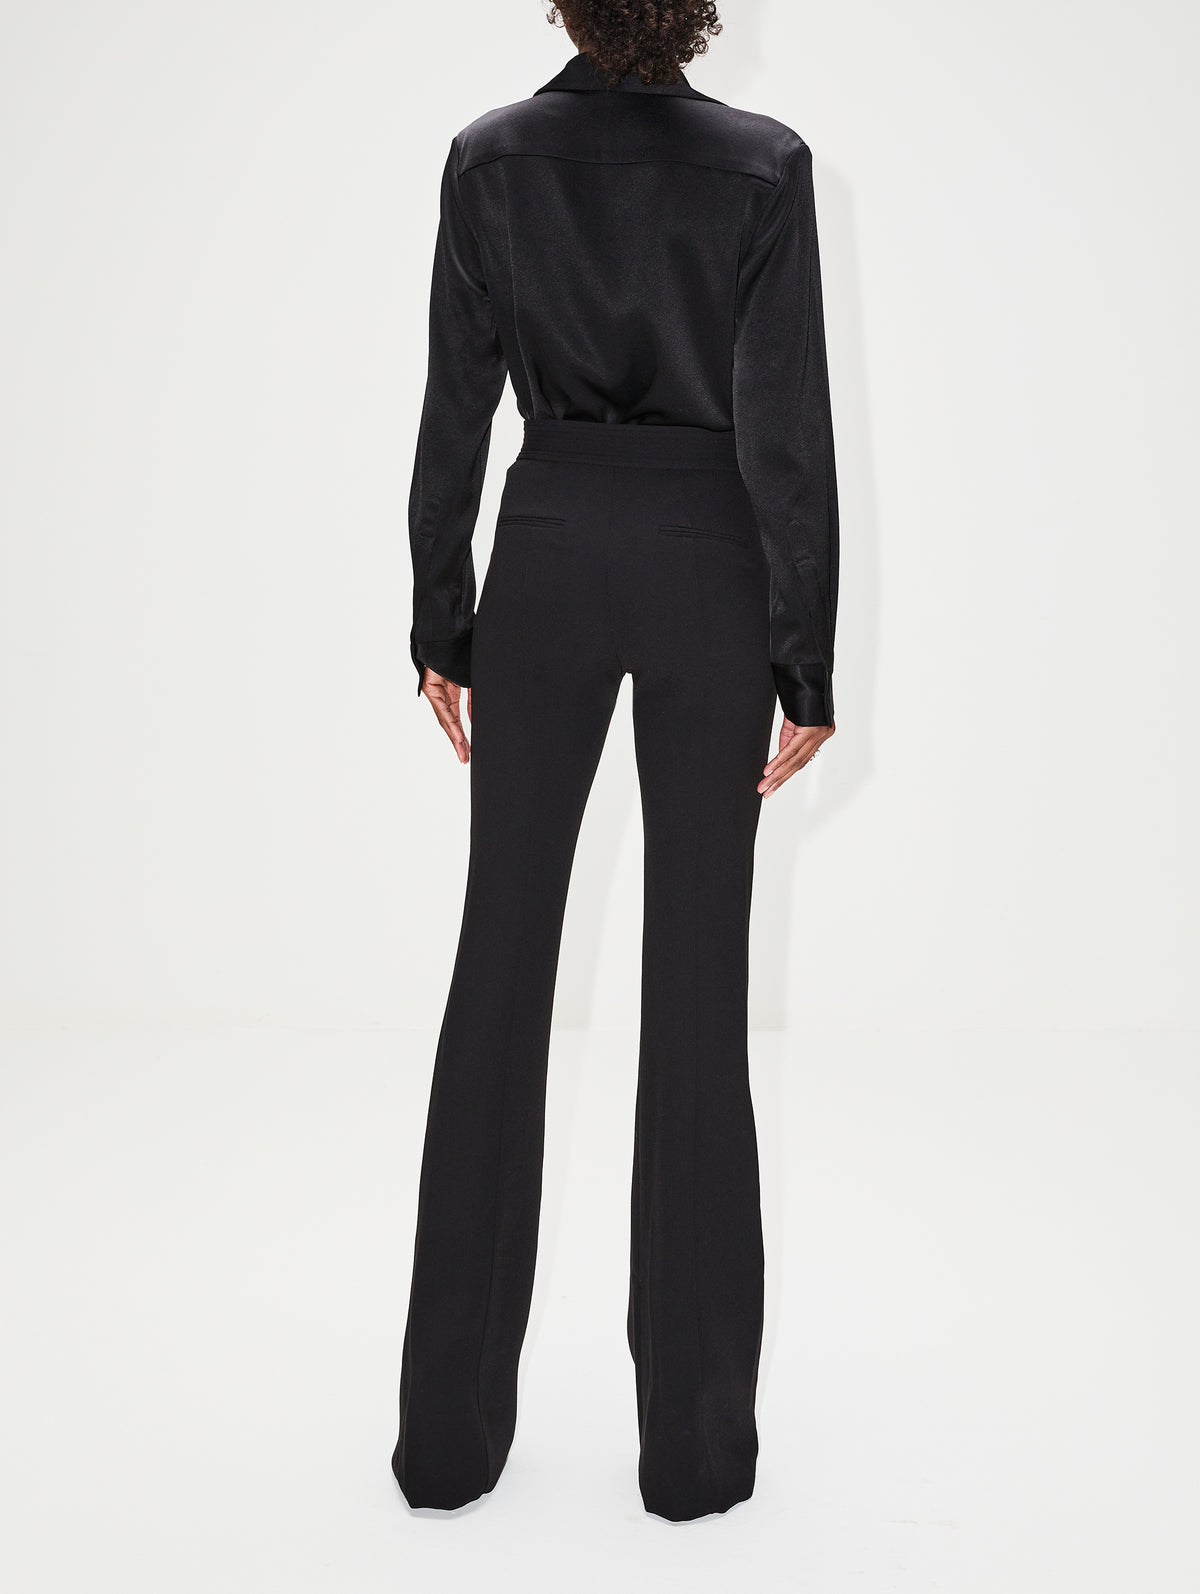 Marden Crepe Flare Pant, ALEX PERRY